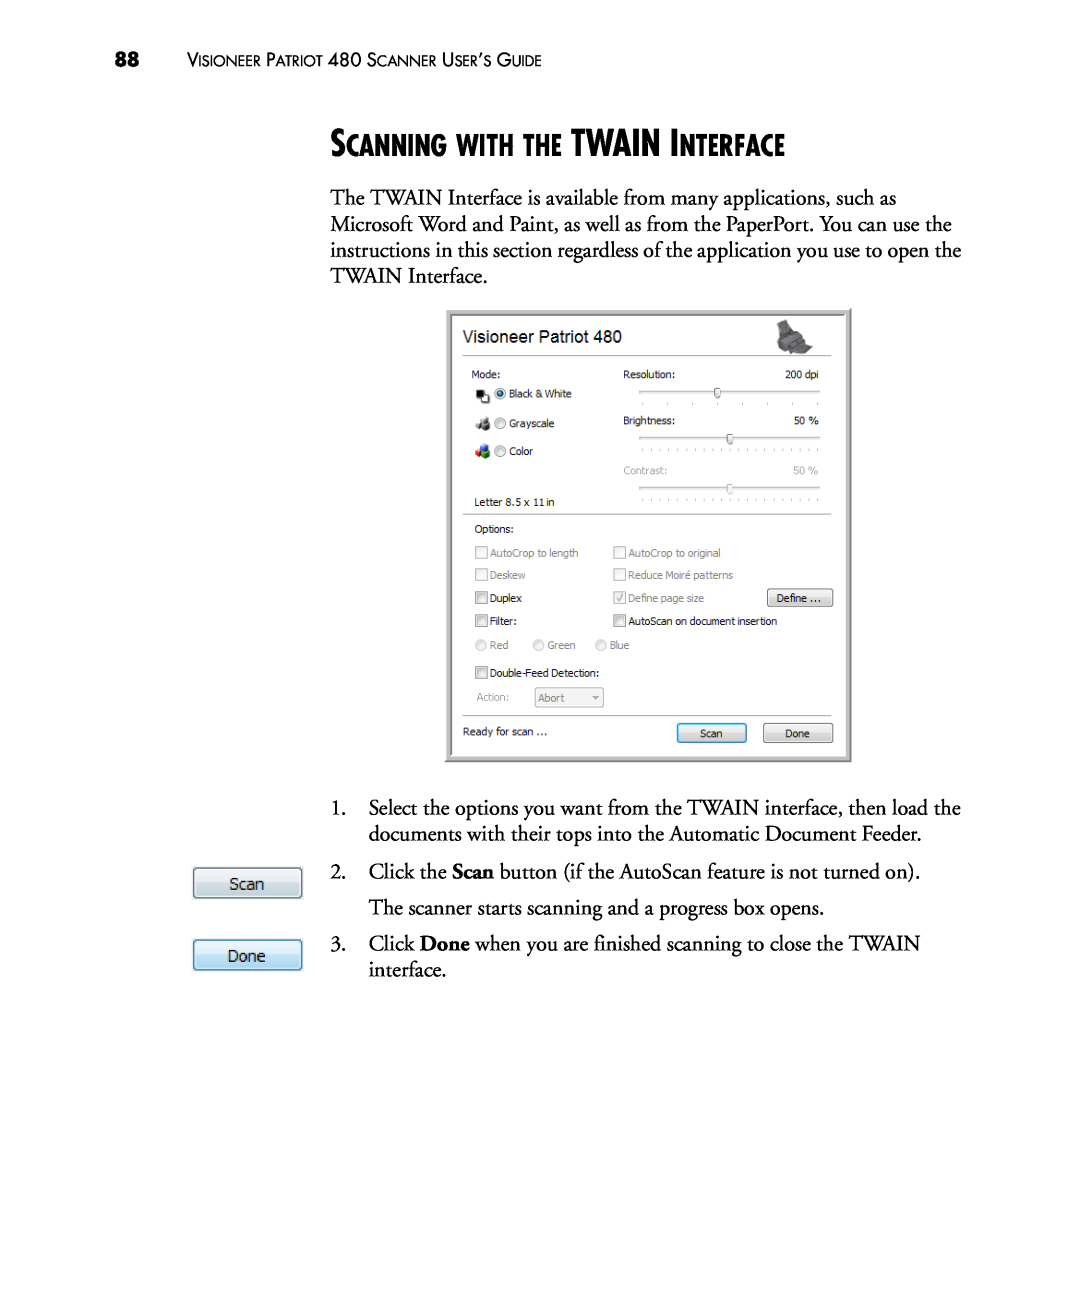 Visioneer manual Scanning With The Twain Interface, VISIONEER PATRIOT 480 SCANNER USER’S GUIDE 